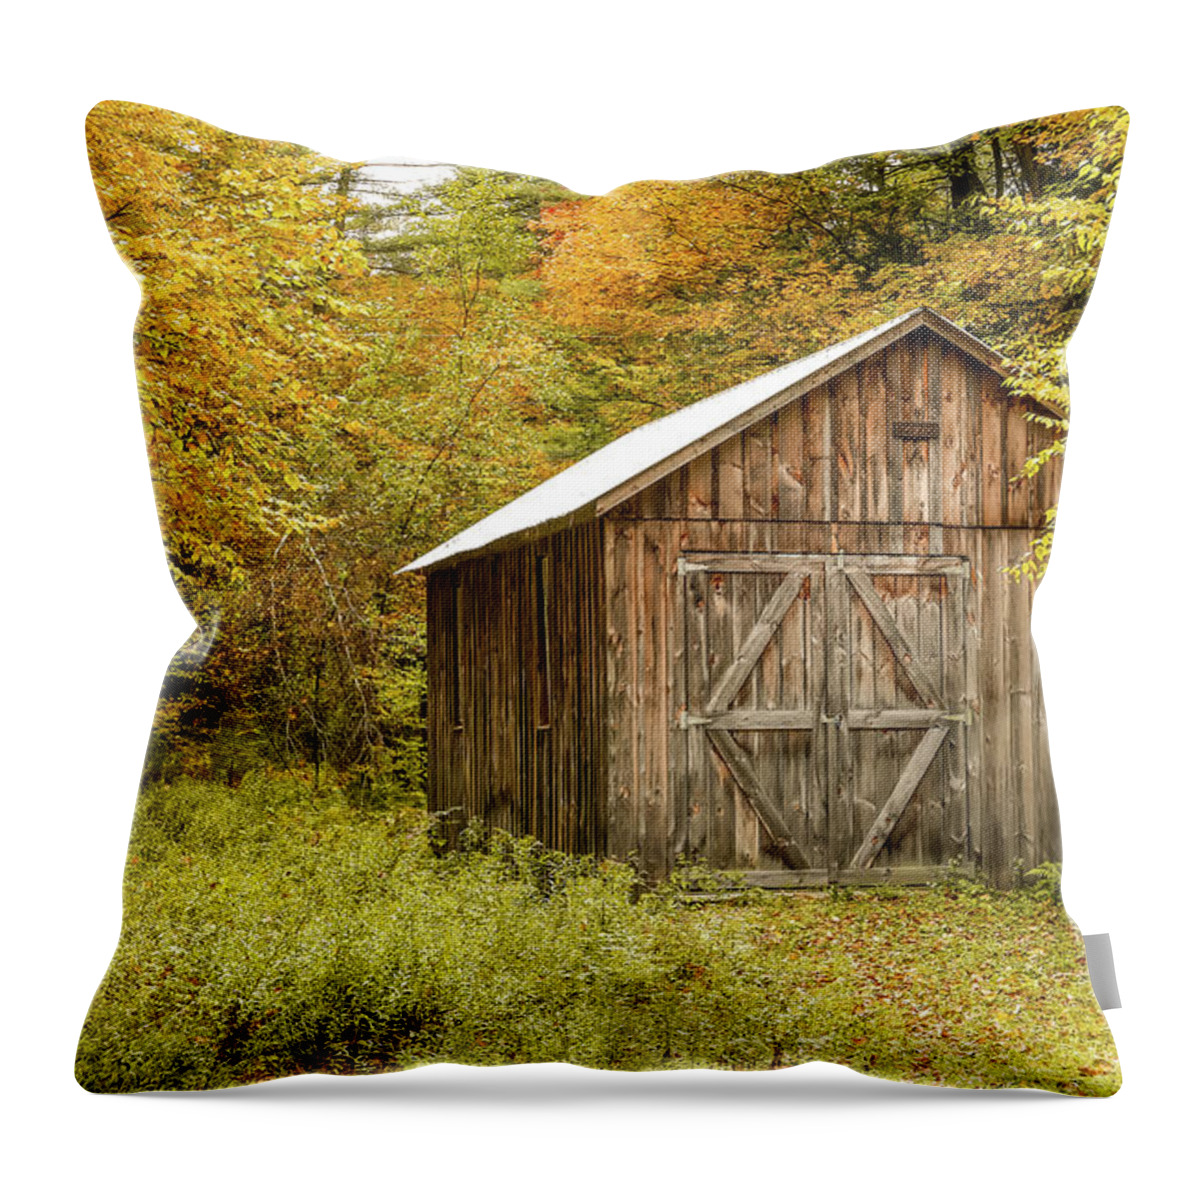 Old Throw Pillow featuring the photograph Old Barn New England and Colorful Fall Foliage by Robert Bellomy